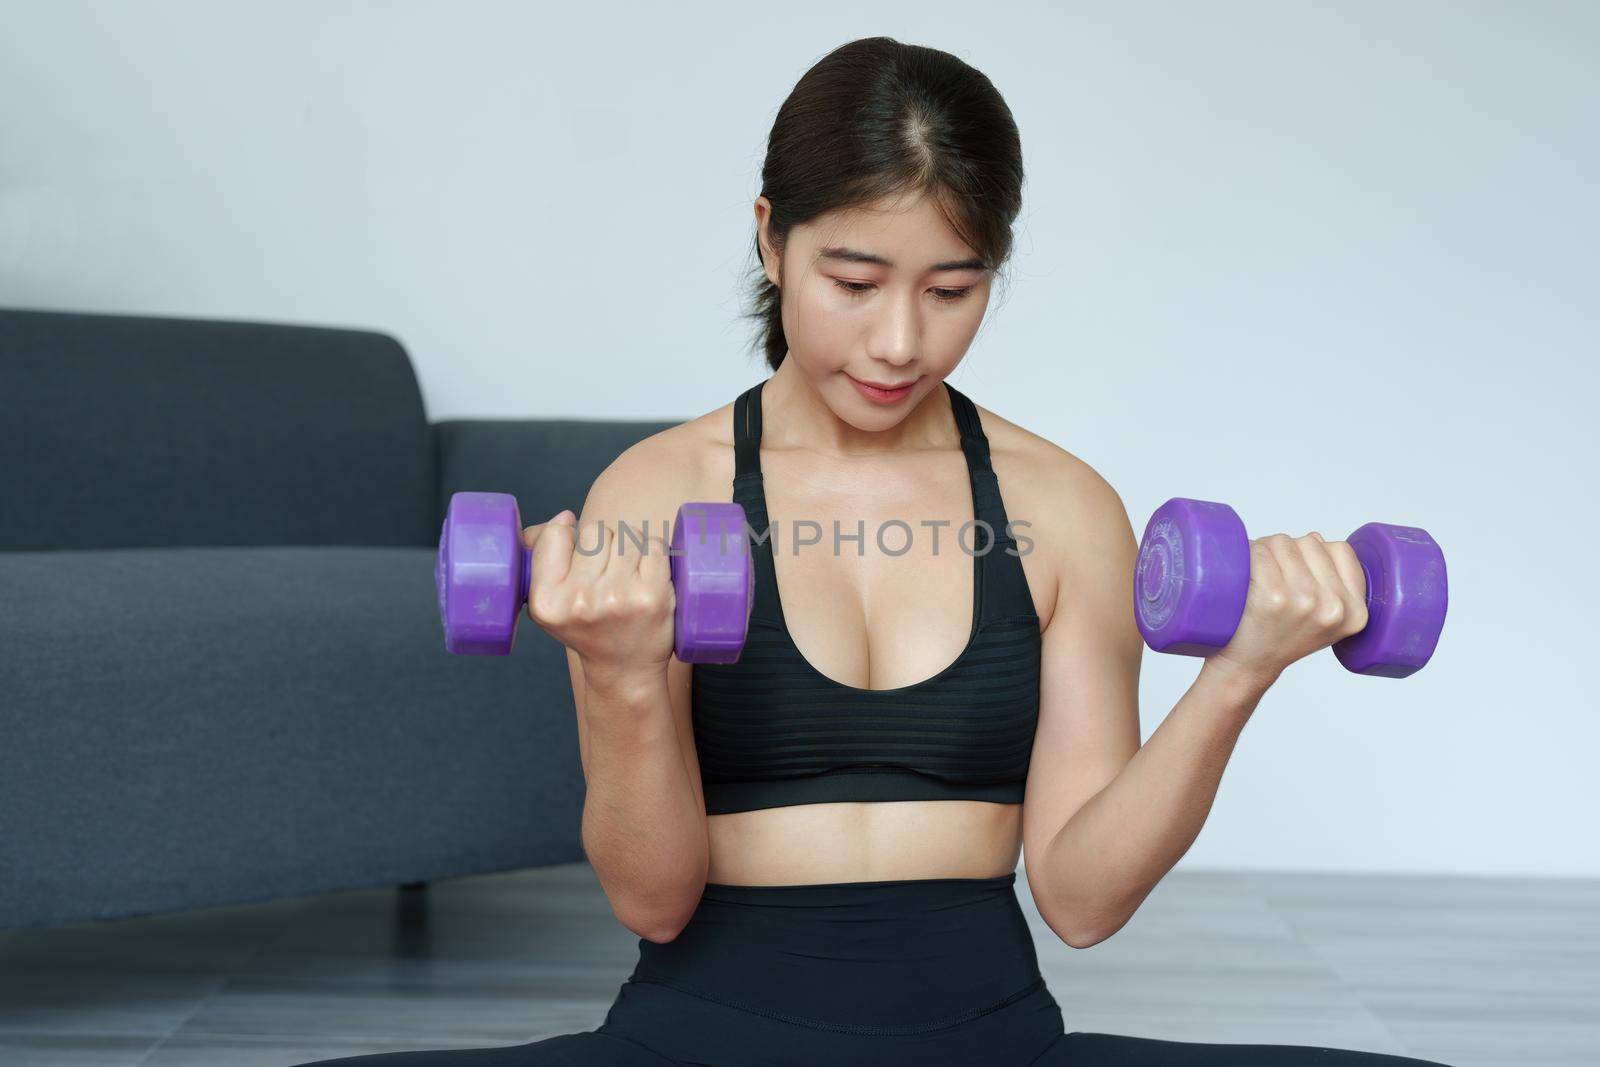 stress relief, , breathing exercises, meditation, portrait of Asian healthy woman lifting weights to strengthen her muscles after work